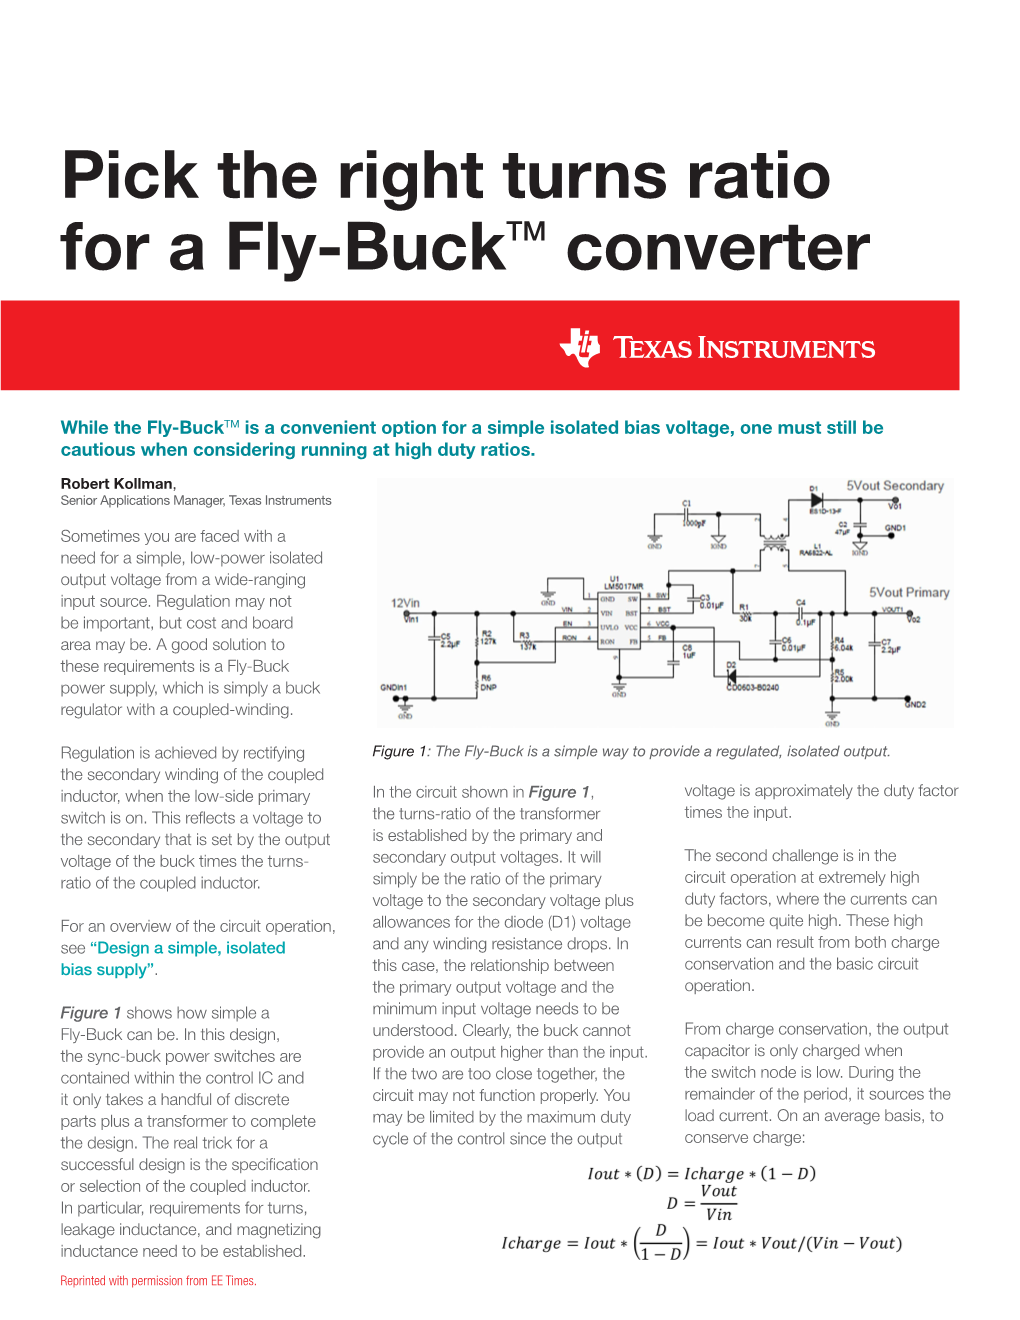 Pick the Right Turns Ratio for a Fly-Buck Converter (Rev. A)